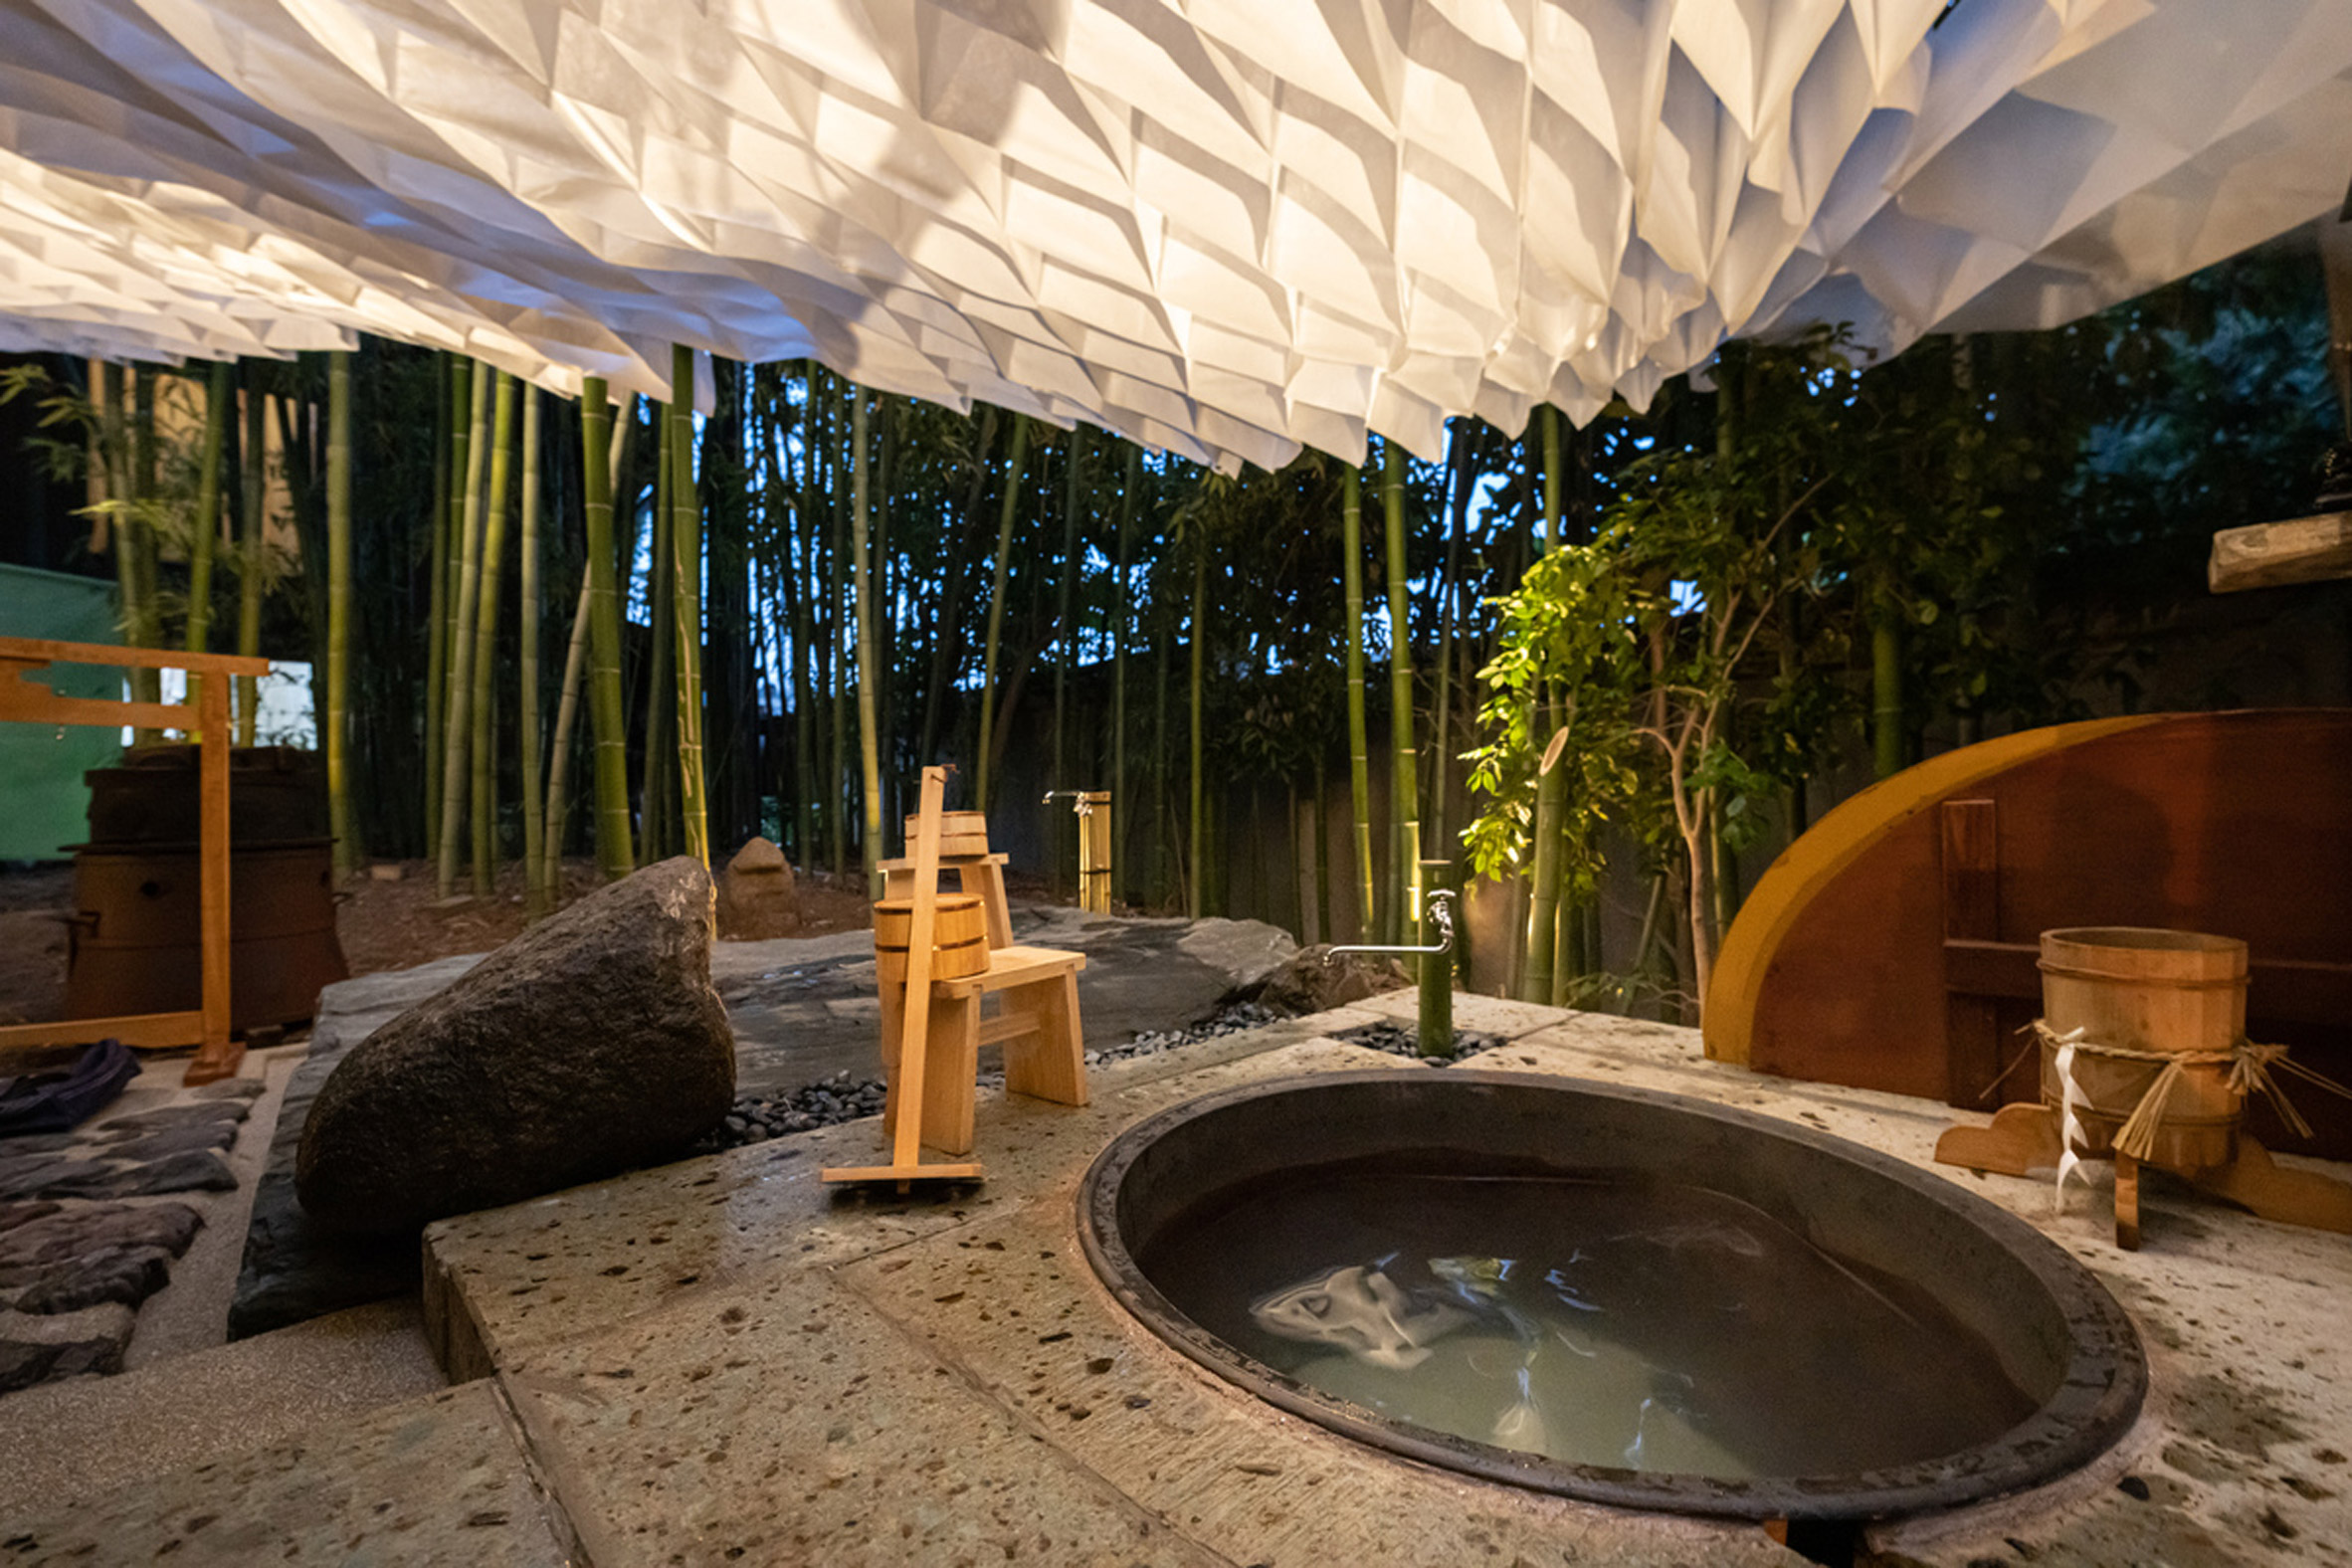 An outdoor tub is pictured beneath the fabric pavilion